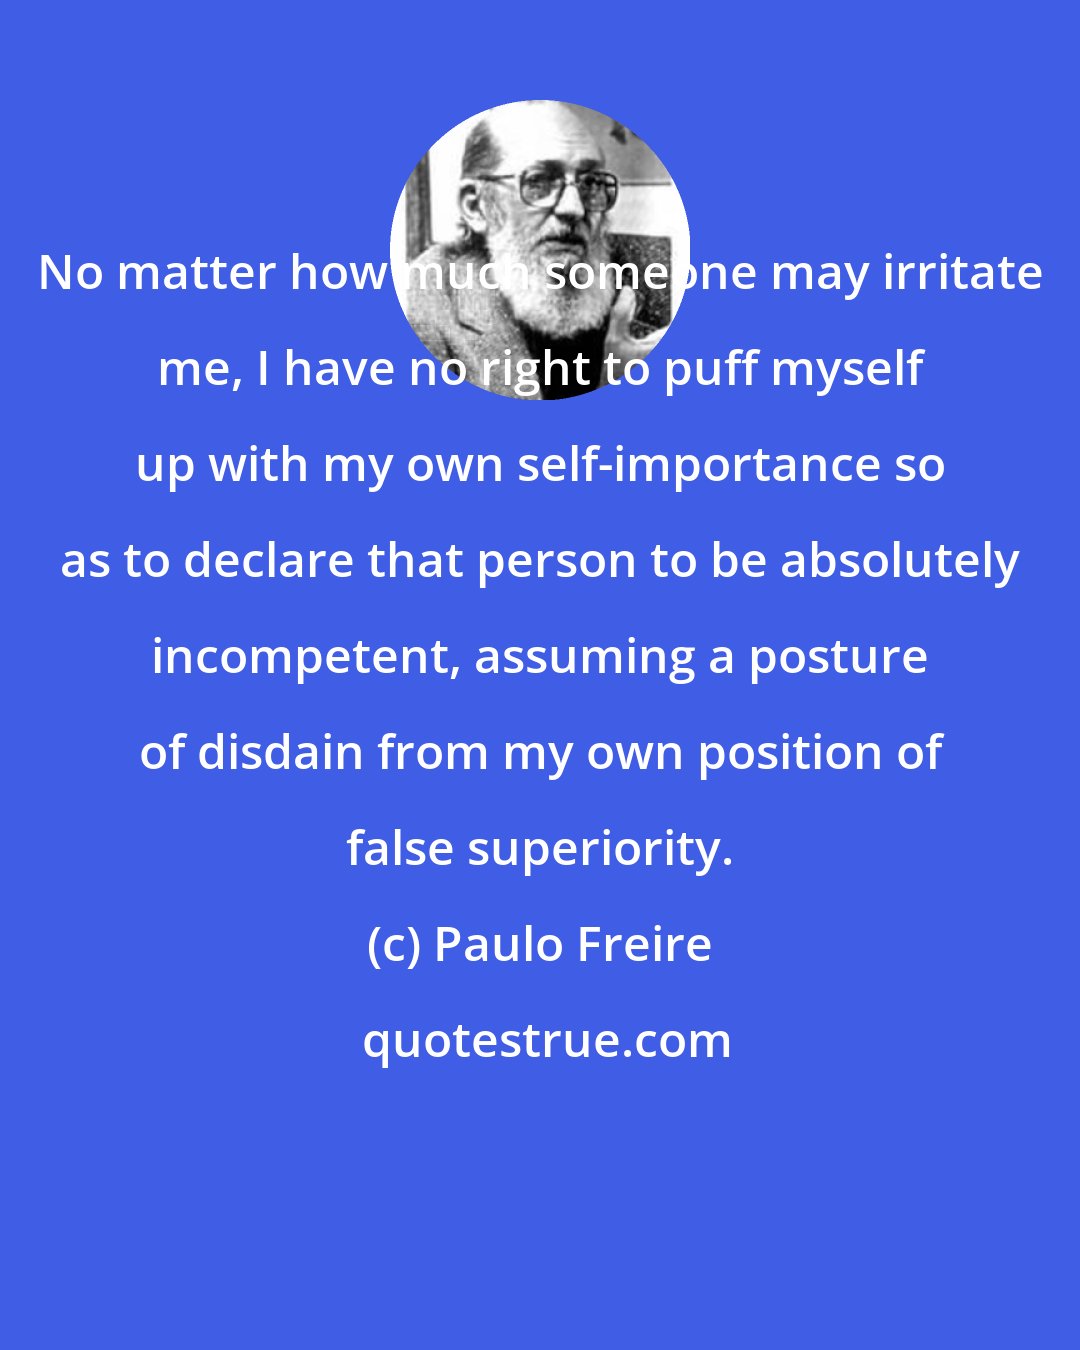 Paulo Freire: No matter how much someone may irritate me, I have no right to puff myself up with my own self-importance so as to declare that person to be absolutely incompetent, assuming a posture of disdain from my own position of false superiority.